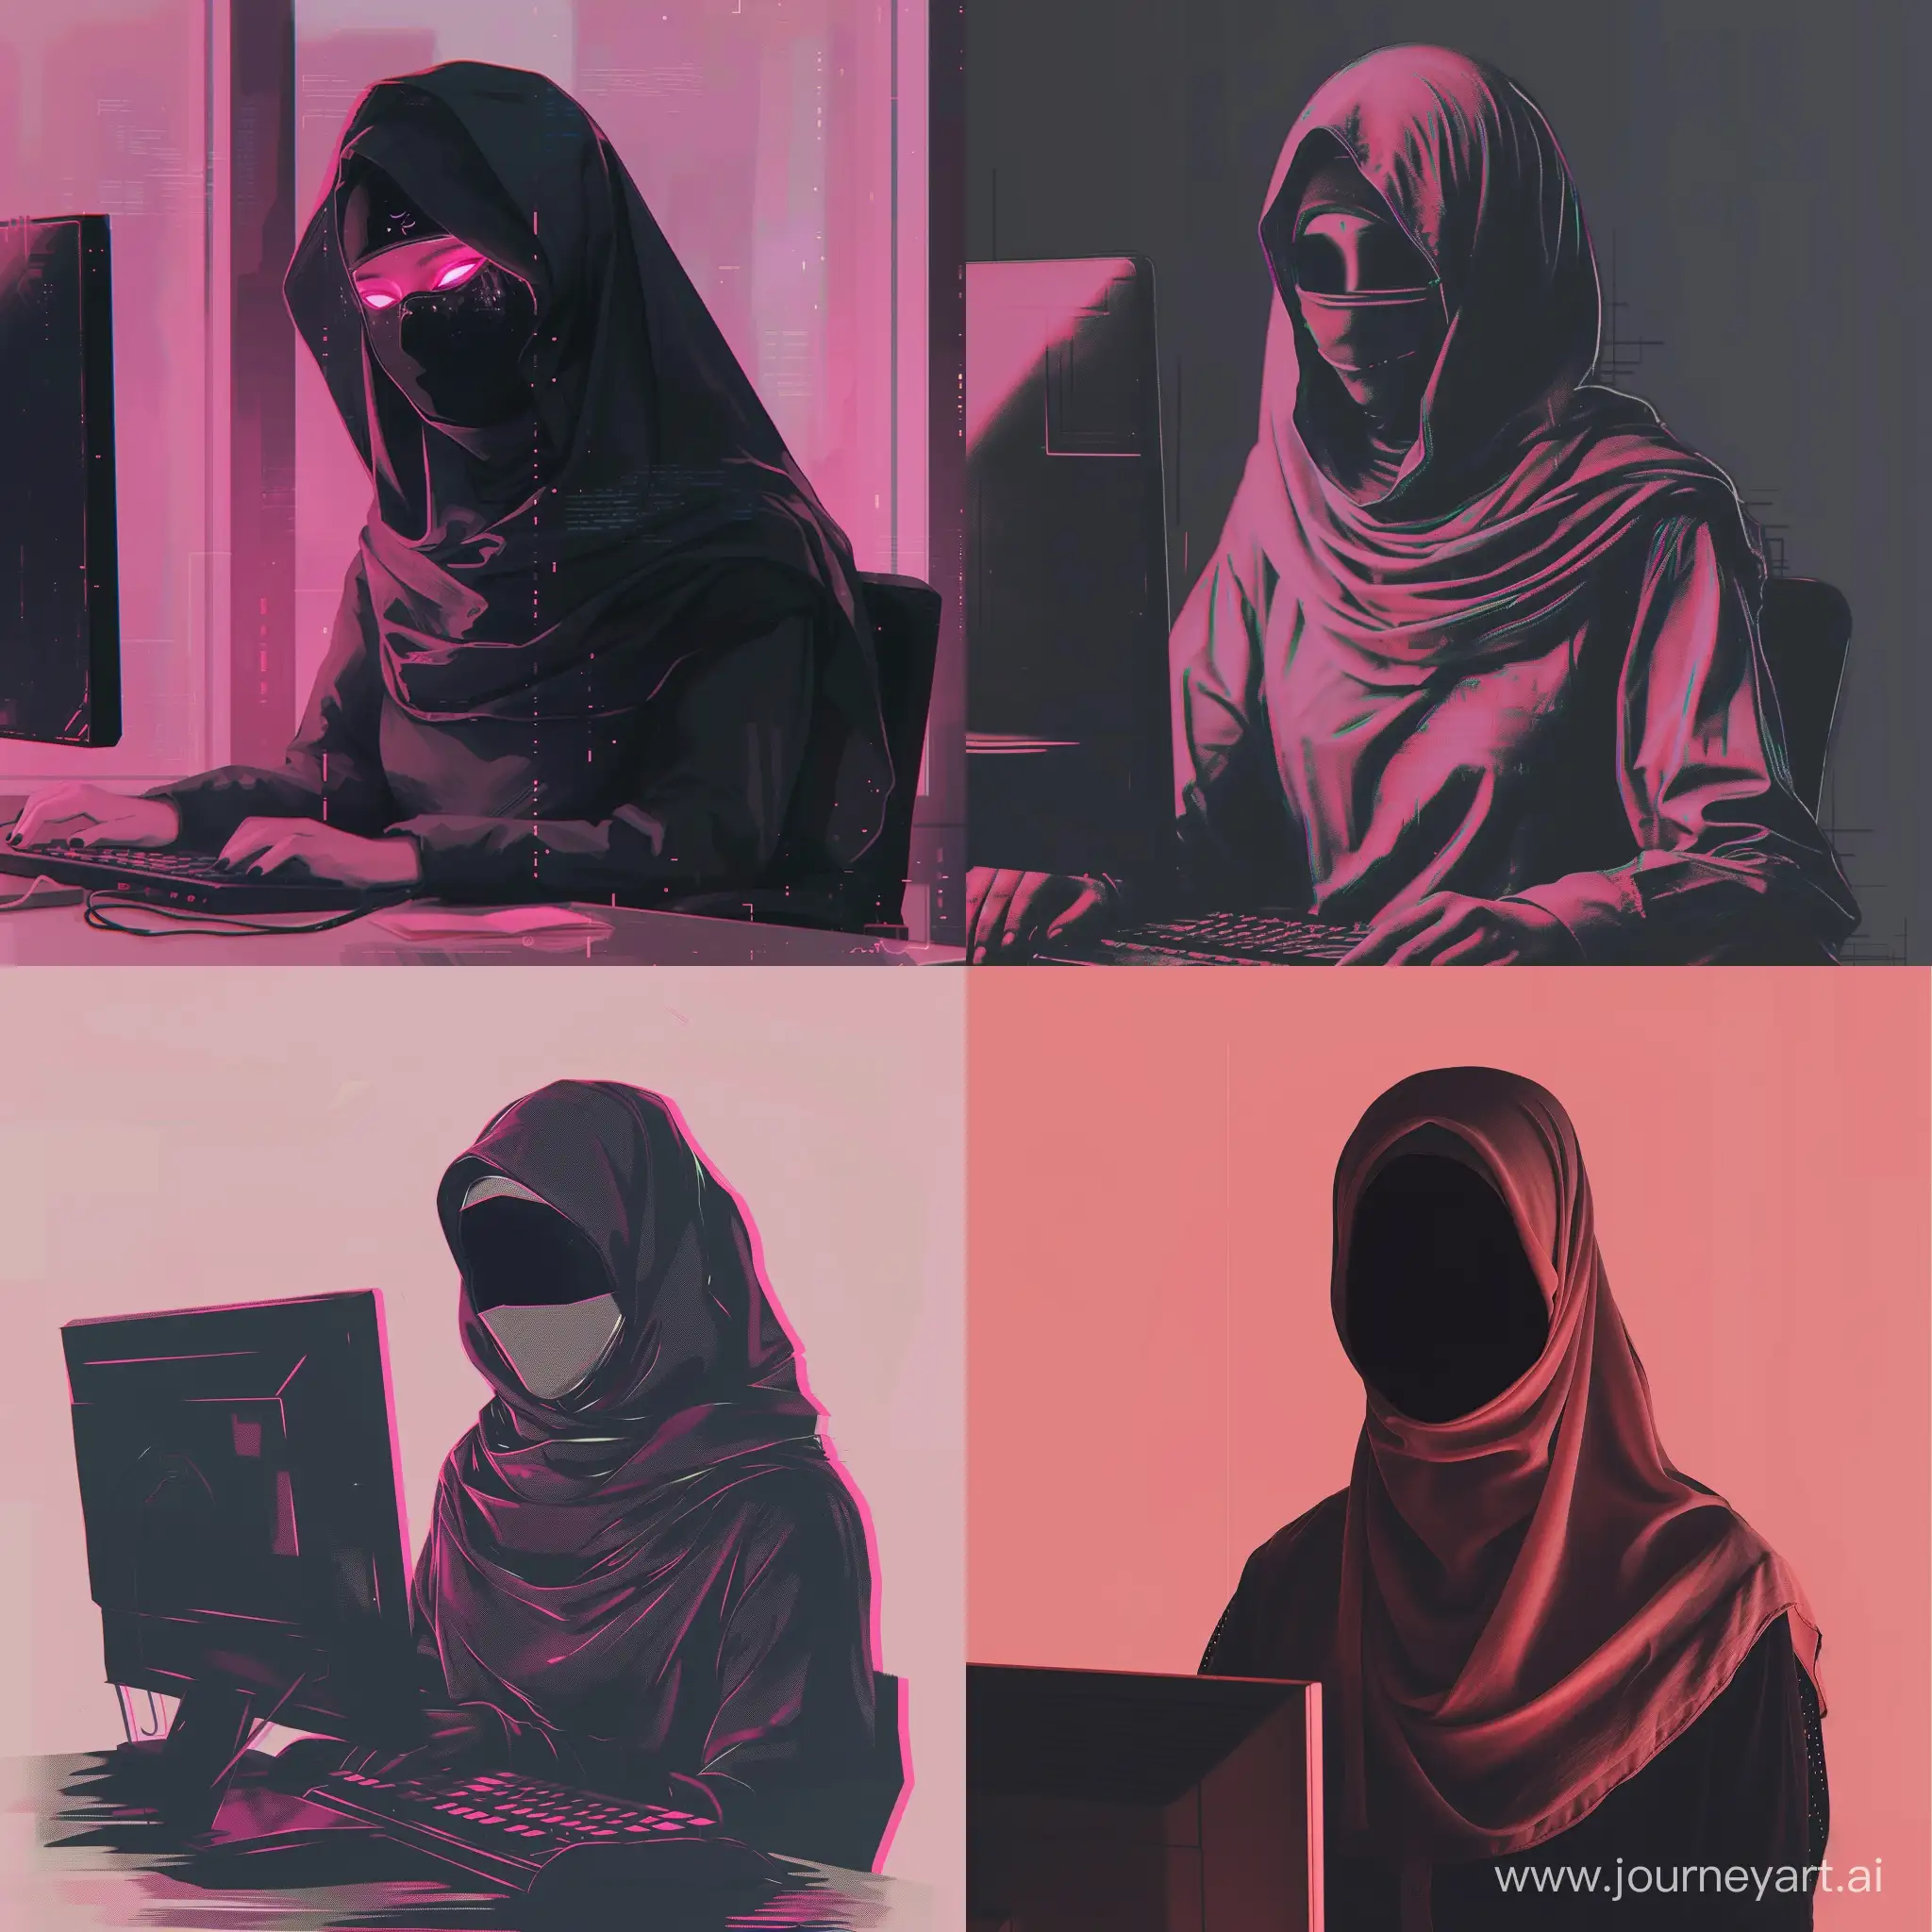 Diverse-Collaboration-HijabClad-Girl-and-Computer-in-Vibrant-Pink-and-Black